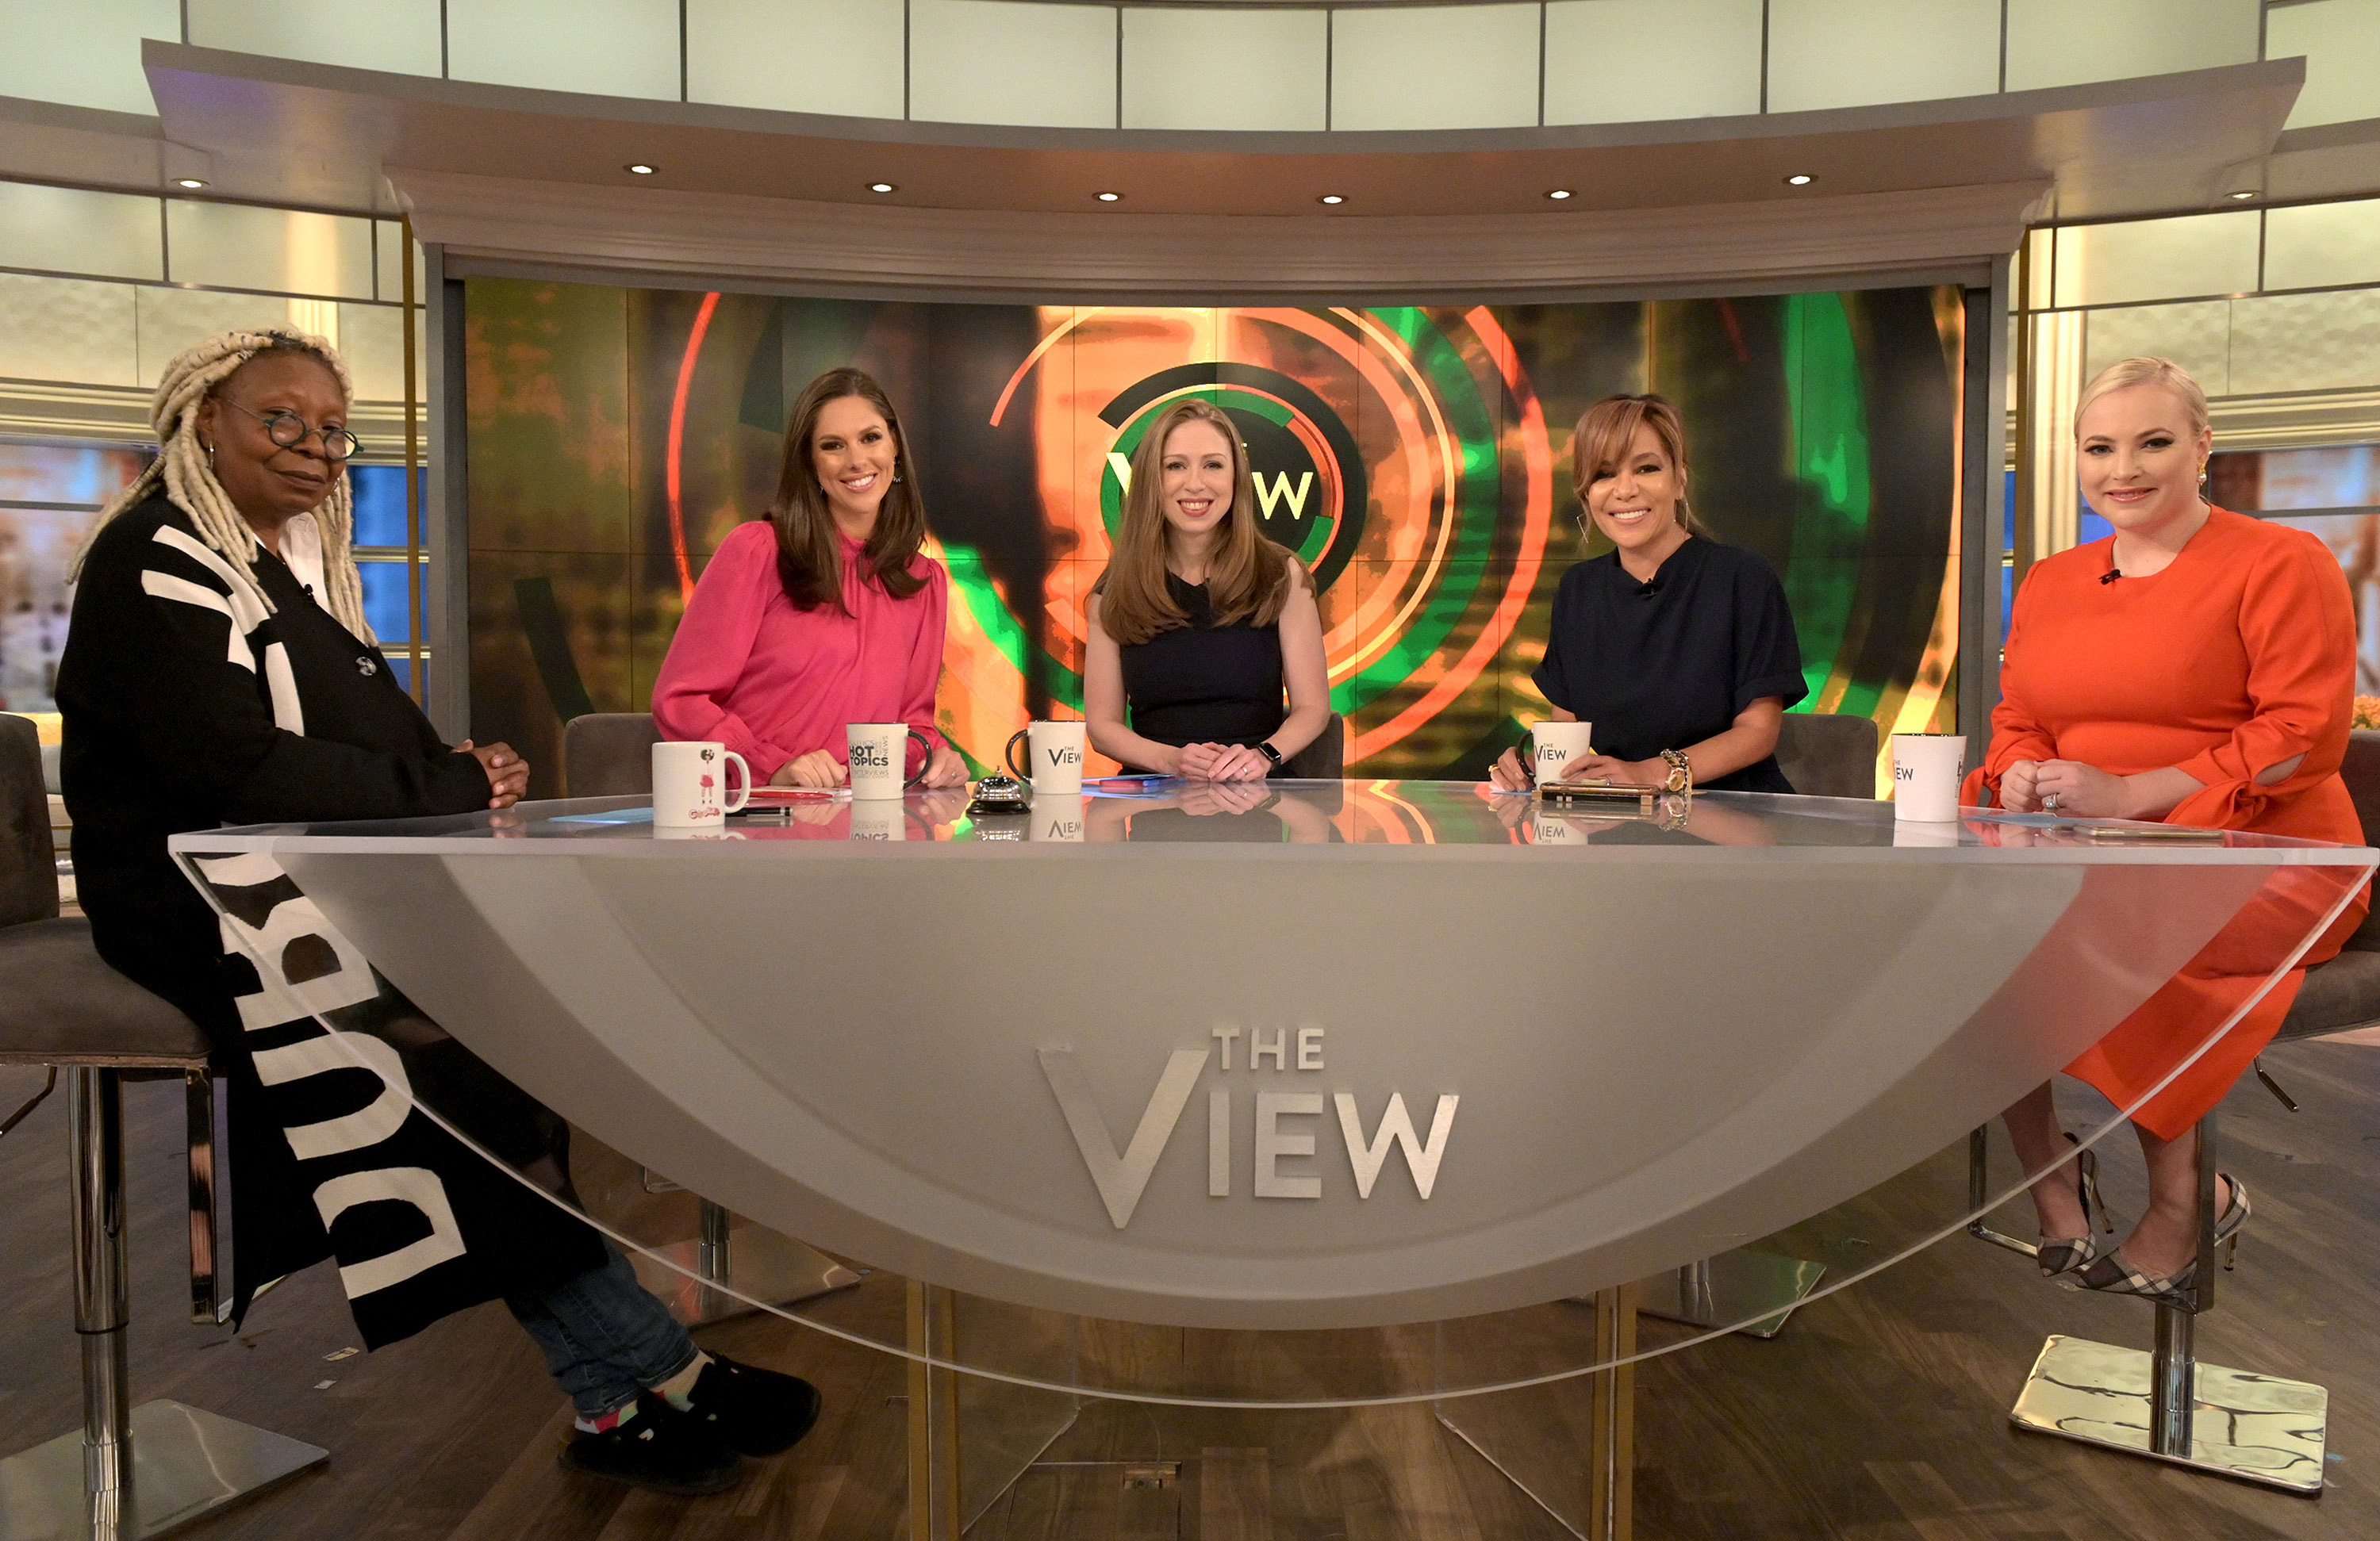 'The View' co-hosts Whoopi Goldberg, Abby Huntsman, Chelsea Clinton, Sunny Hostin, and Meghan McCain pose for a photo before a taping.